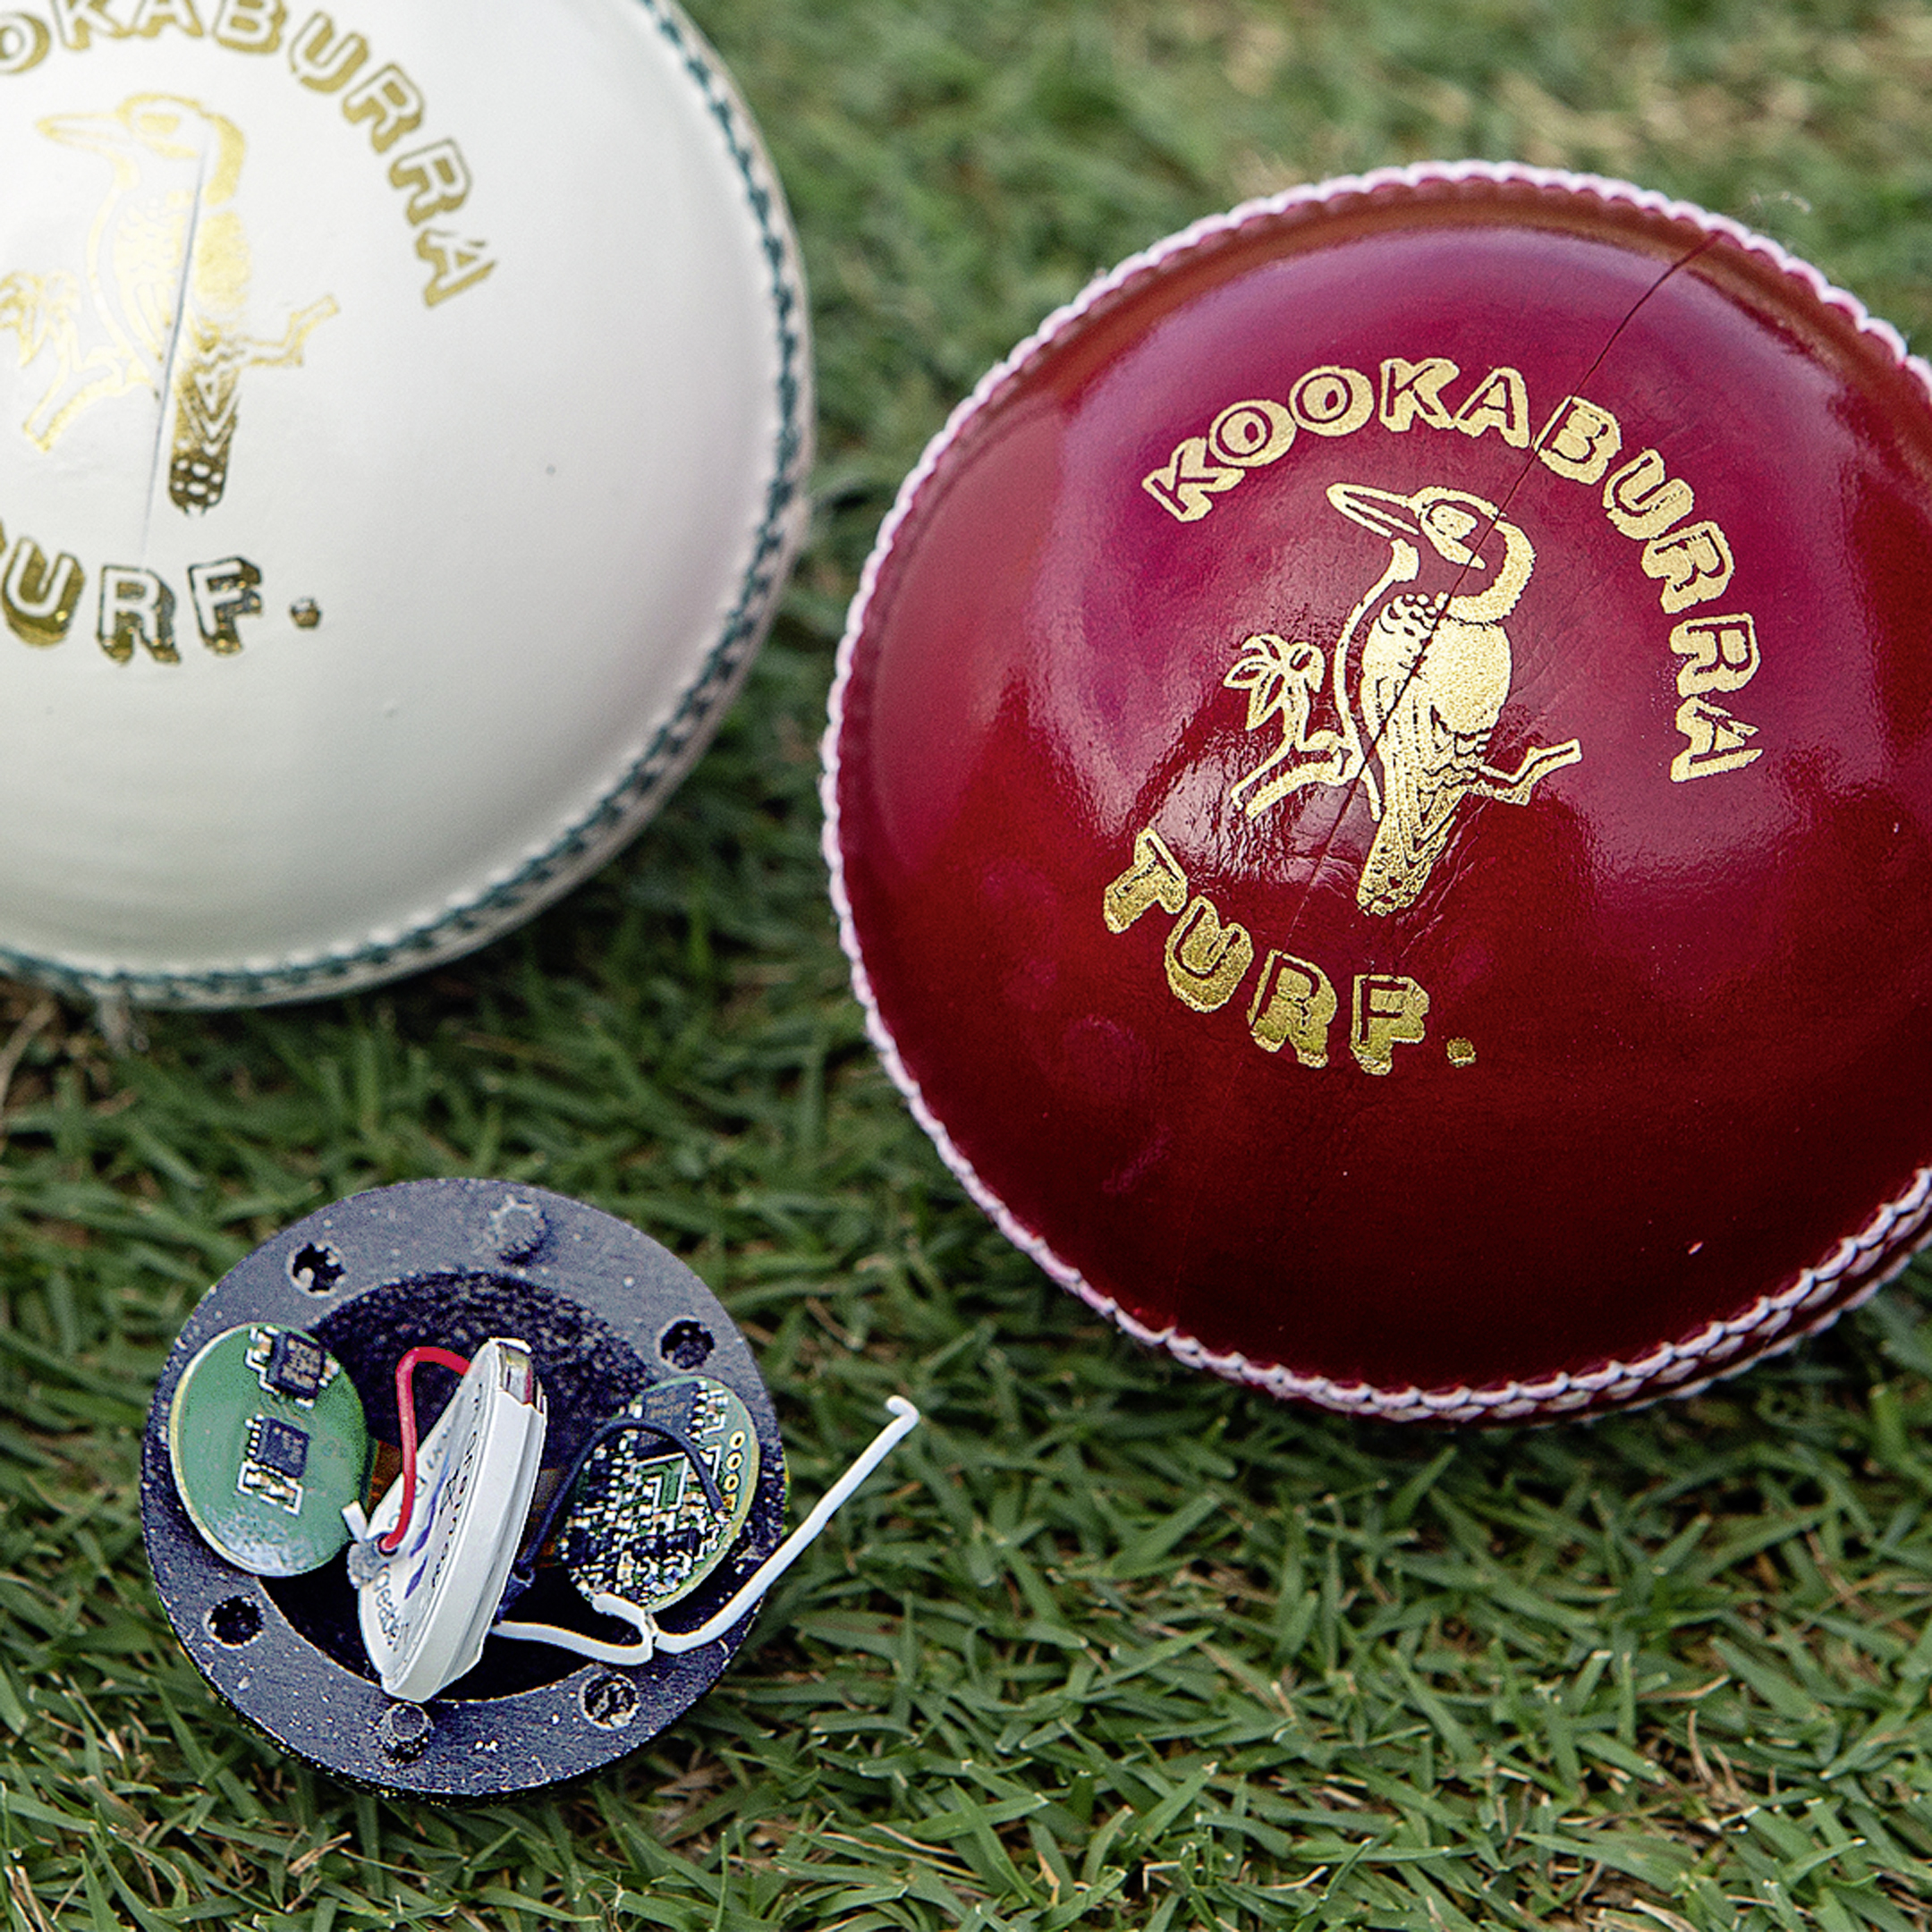 Champagne Uitbeelding Walging Smart Cricket Ball measures your bowling performance